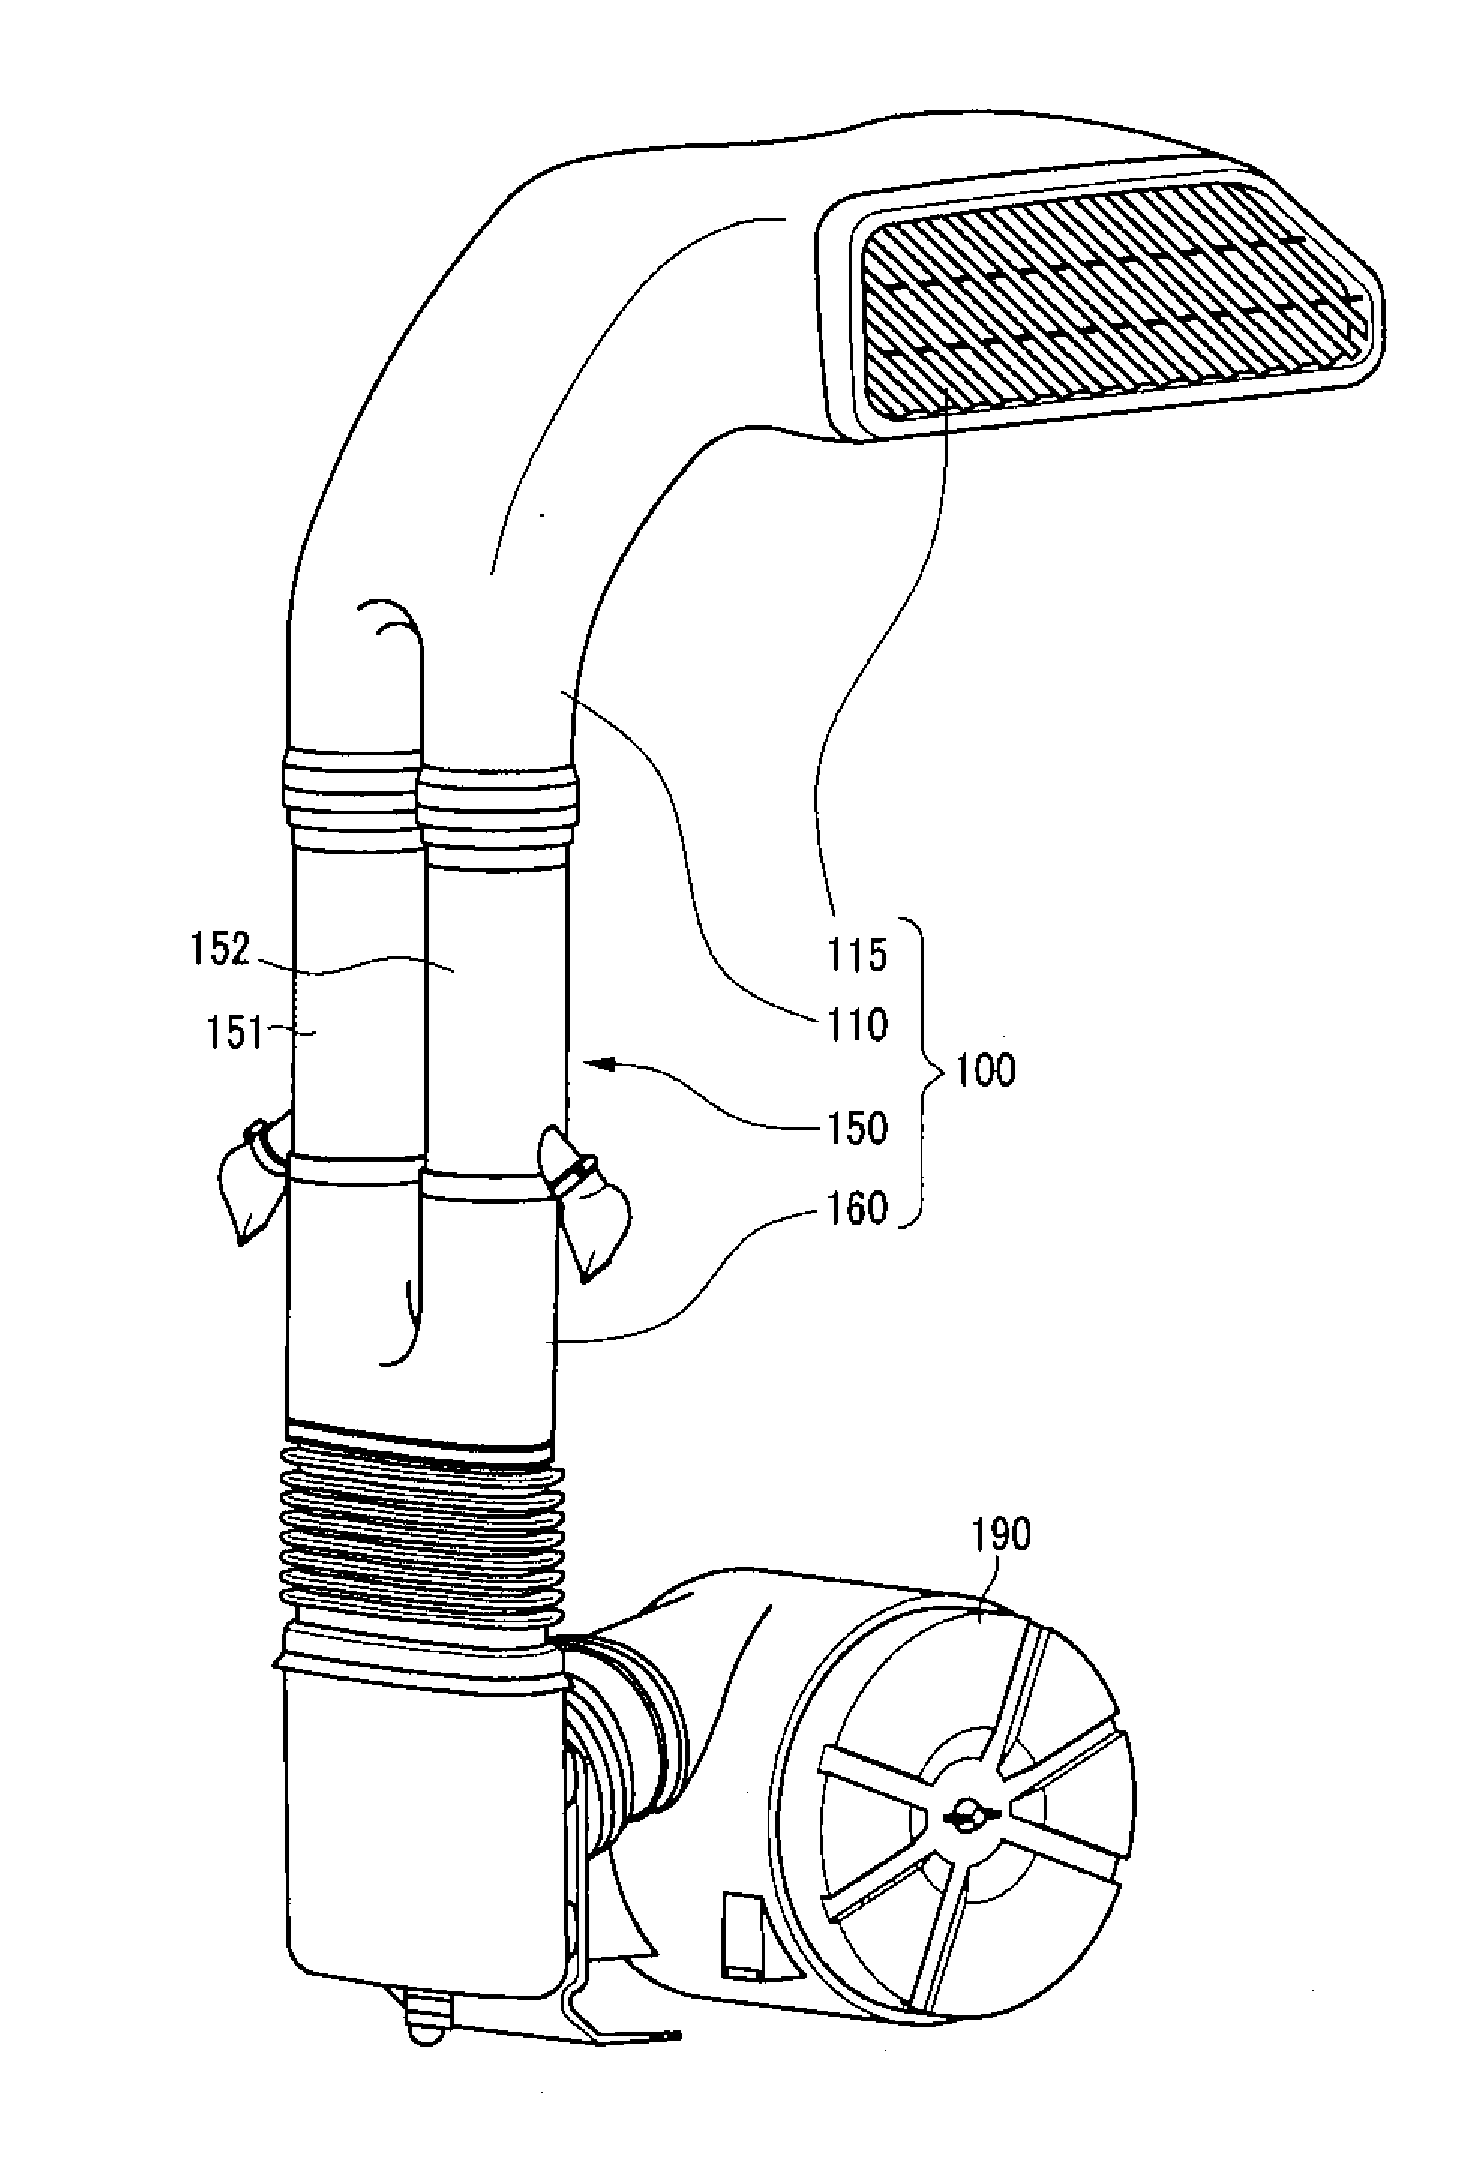 Intake duct system for an engine